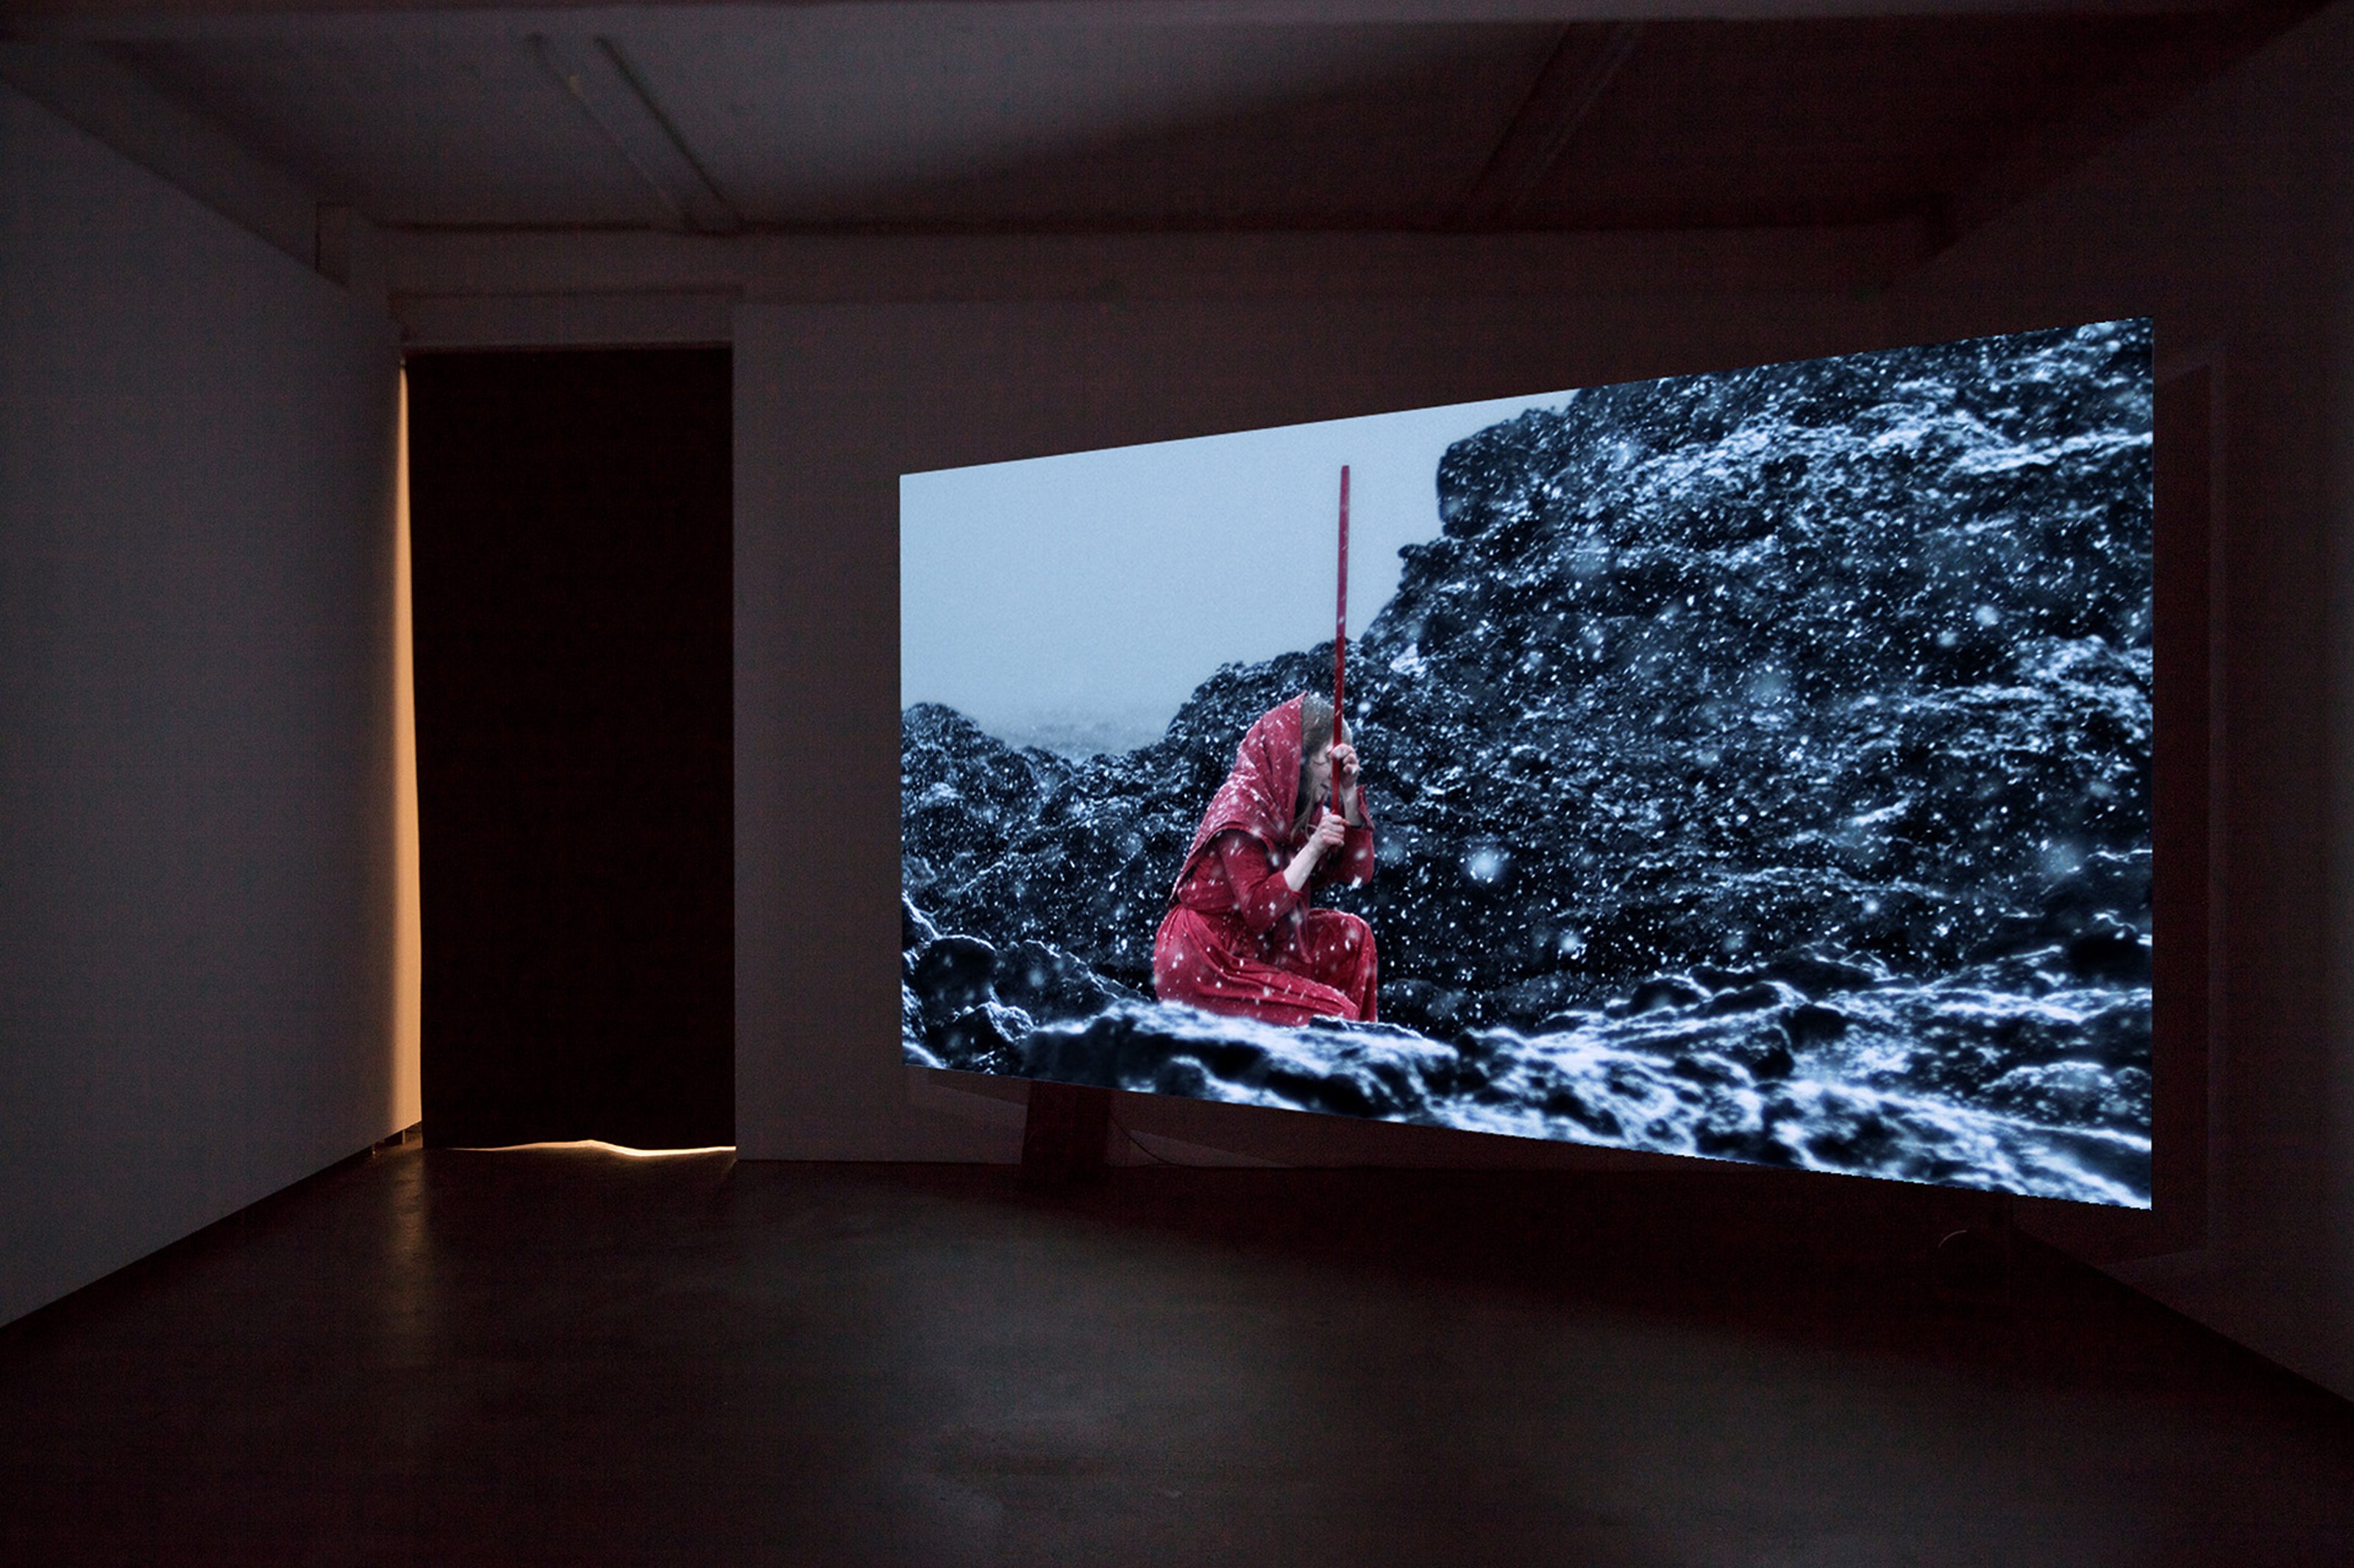 Video installed in a gallery space, on the projection is a woman sitting on a rocky surface, holding onto a long stick. There is snowfall around her